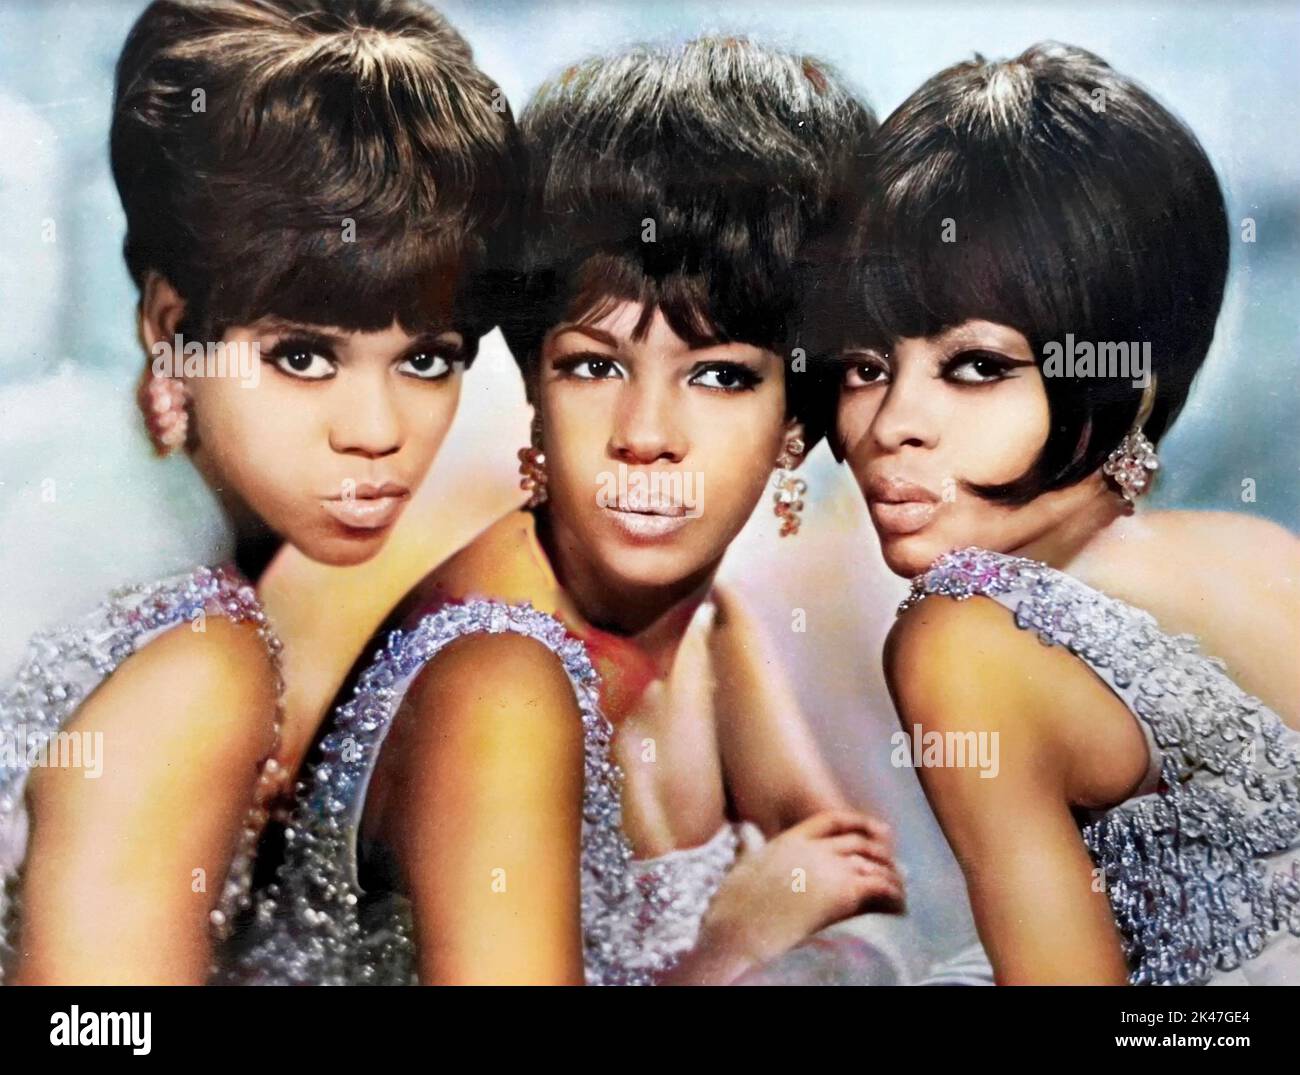 THE SUPREMES US vocal group about 1966. From left: Florence Ballard, Mary Wilson,Diana Ross. Stock Photo